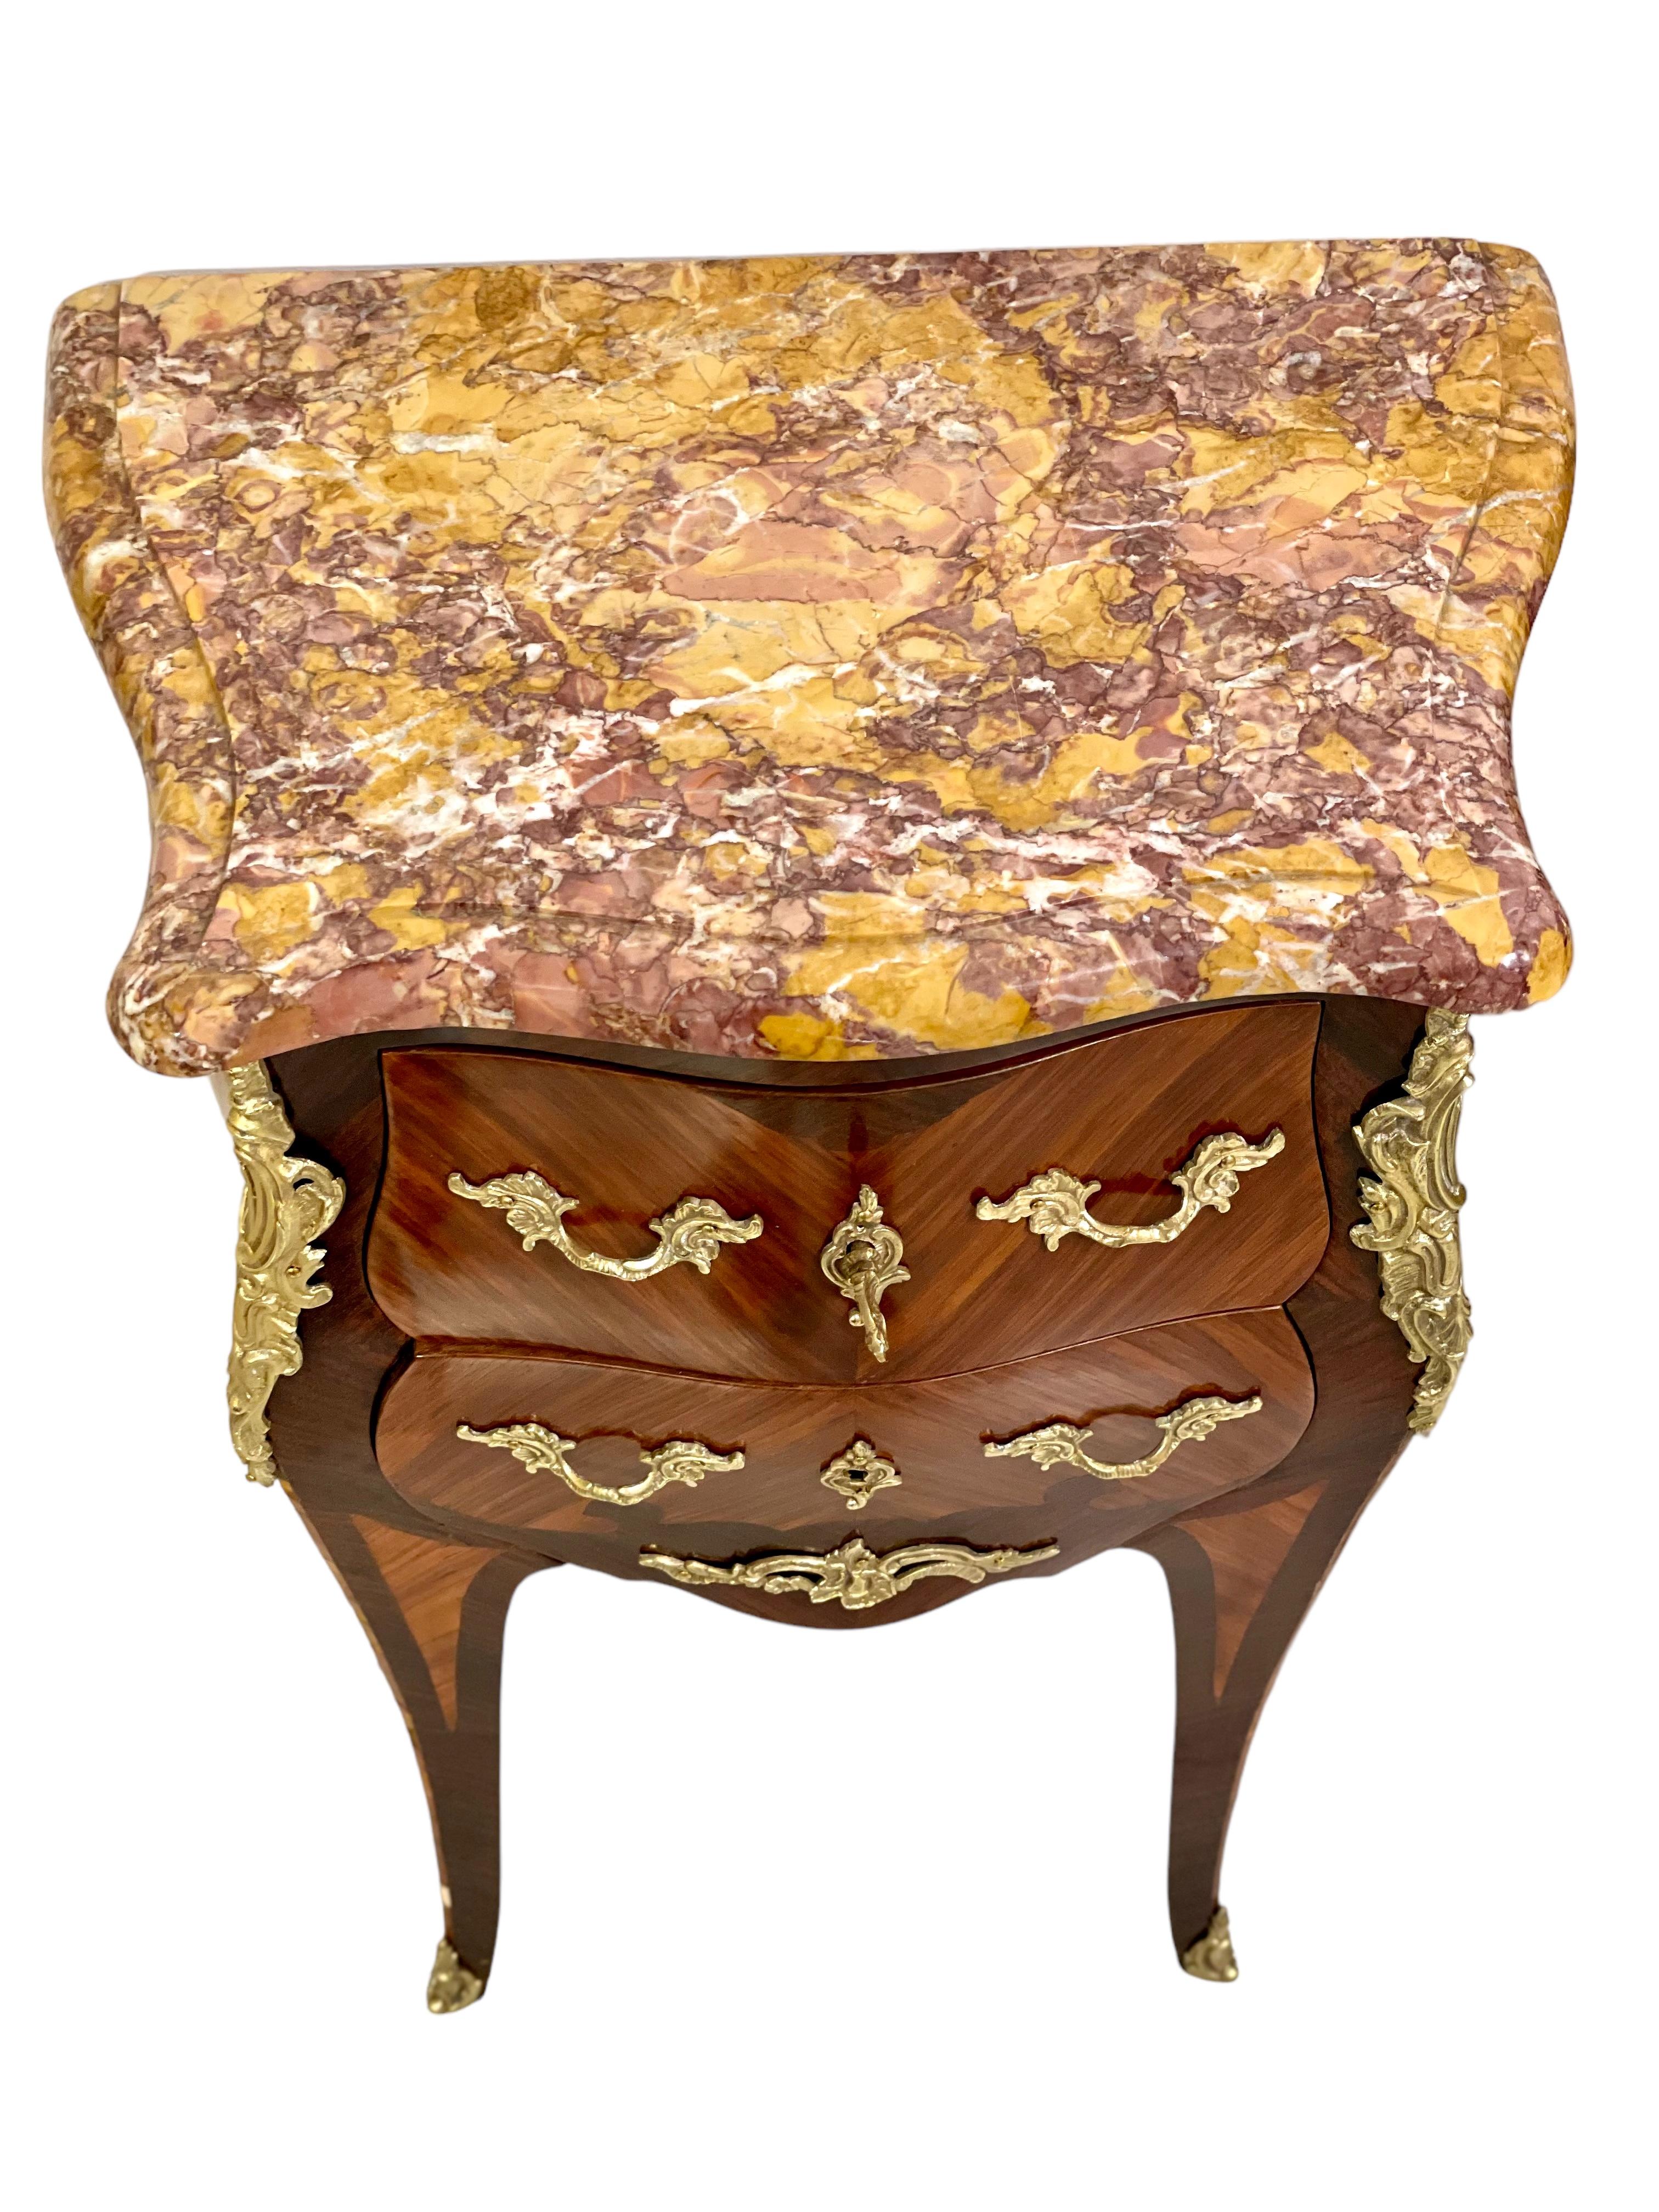 19th Century 19th C. Pair of French Louis XV Style Petites Commodes with Marble Top